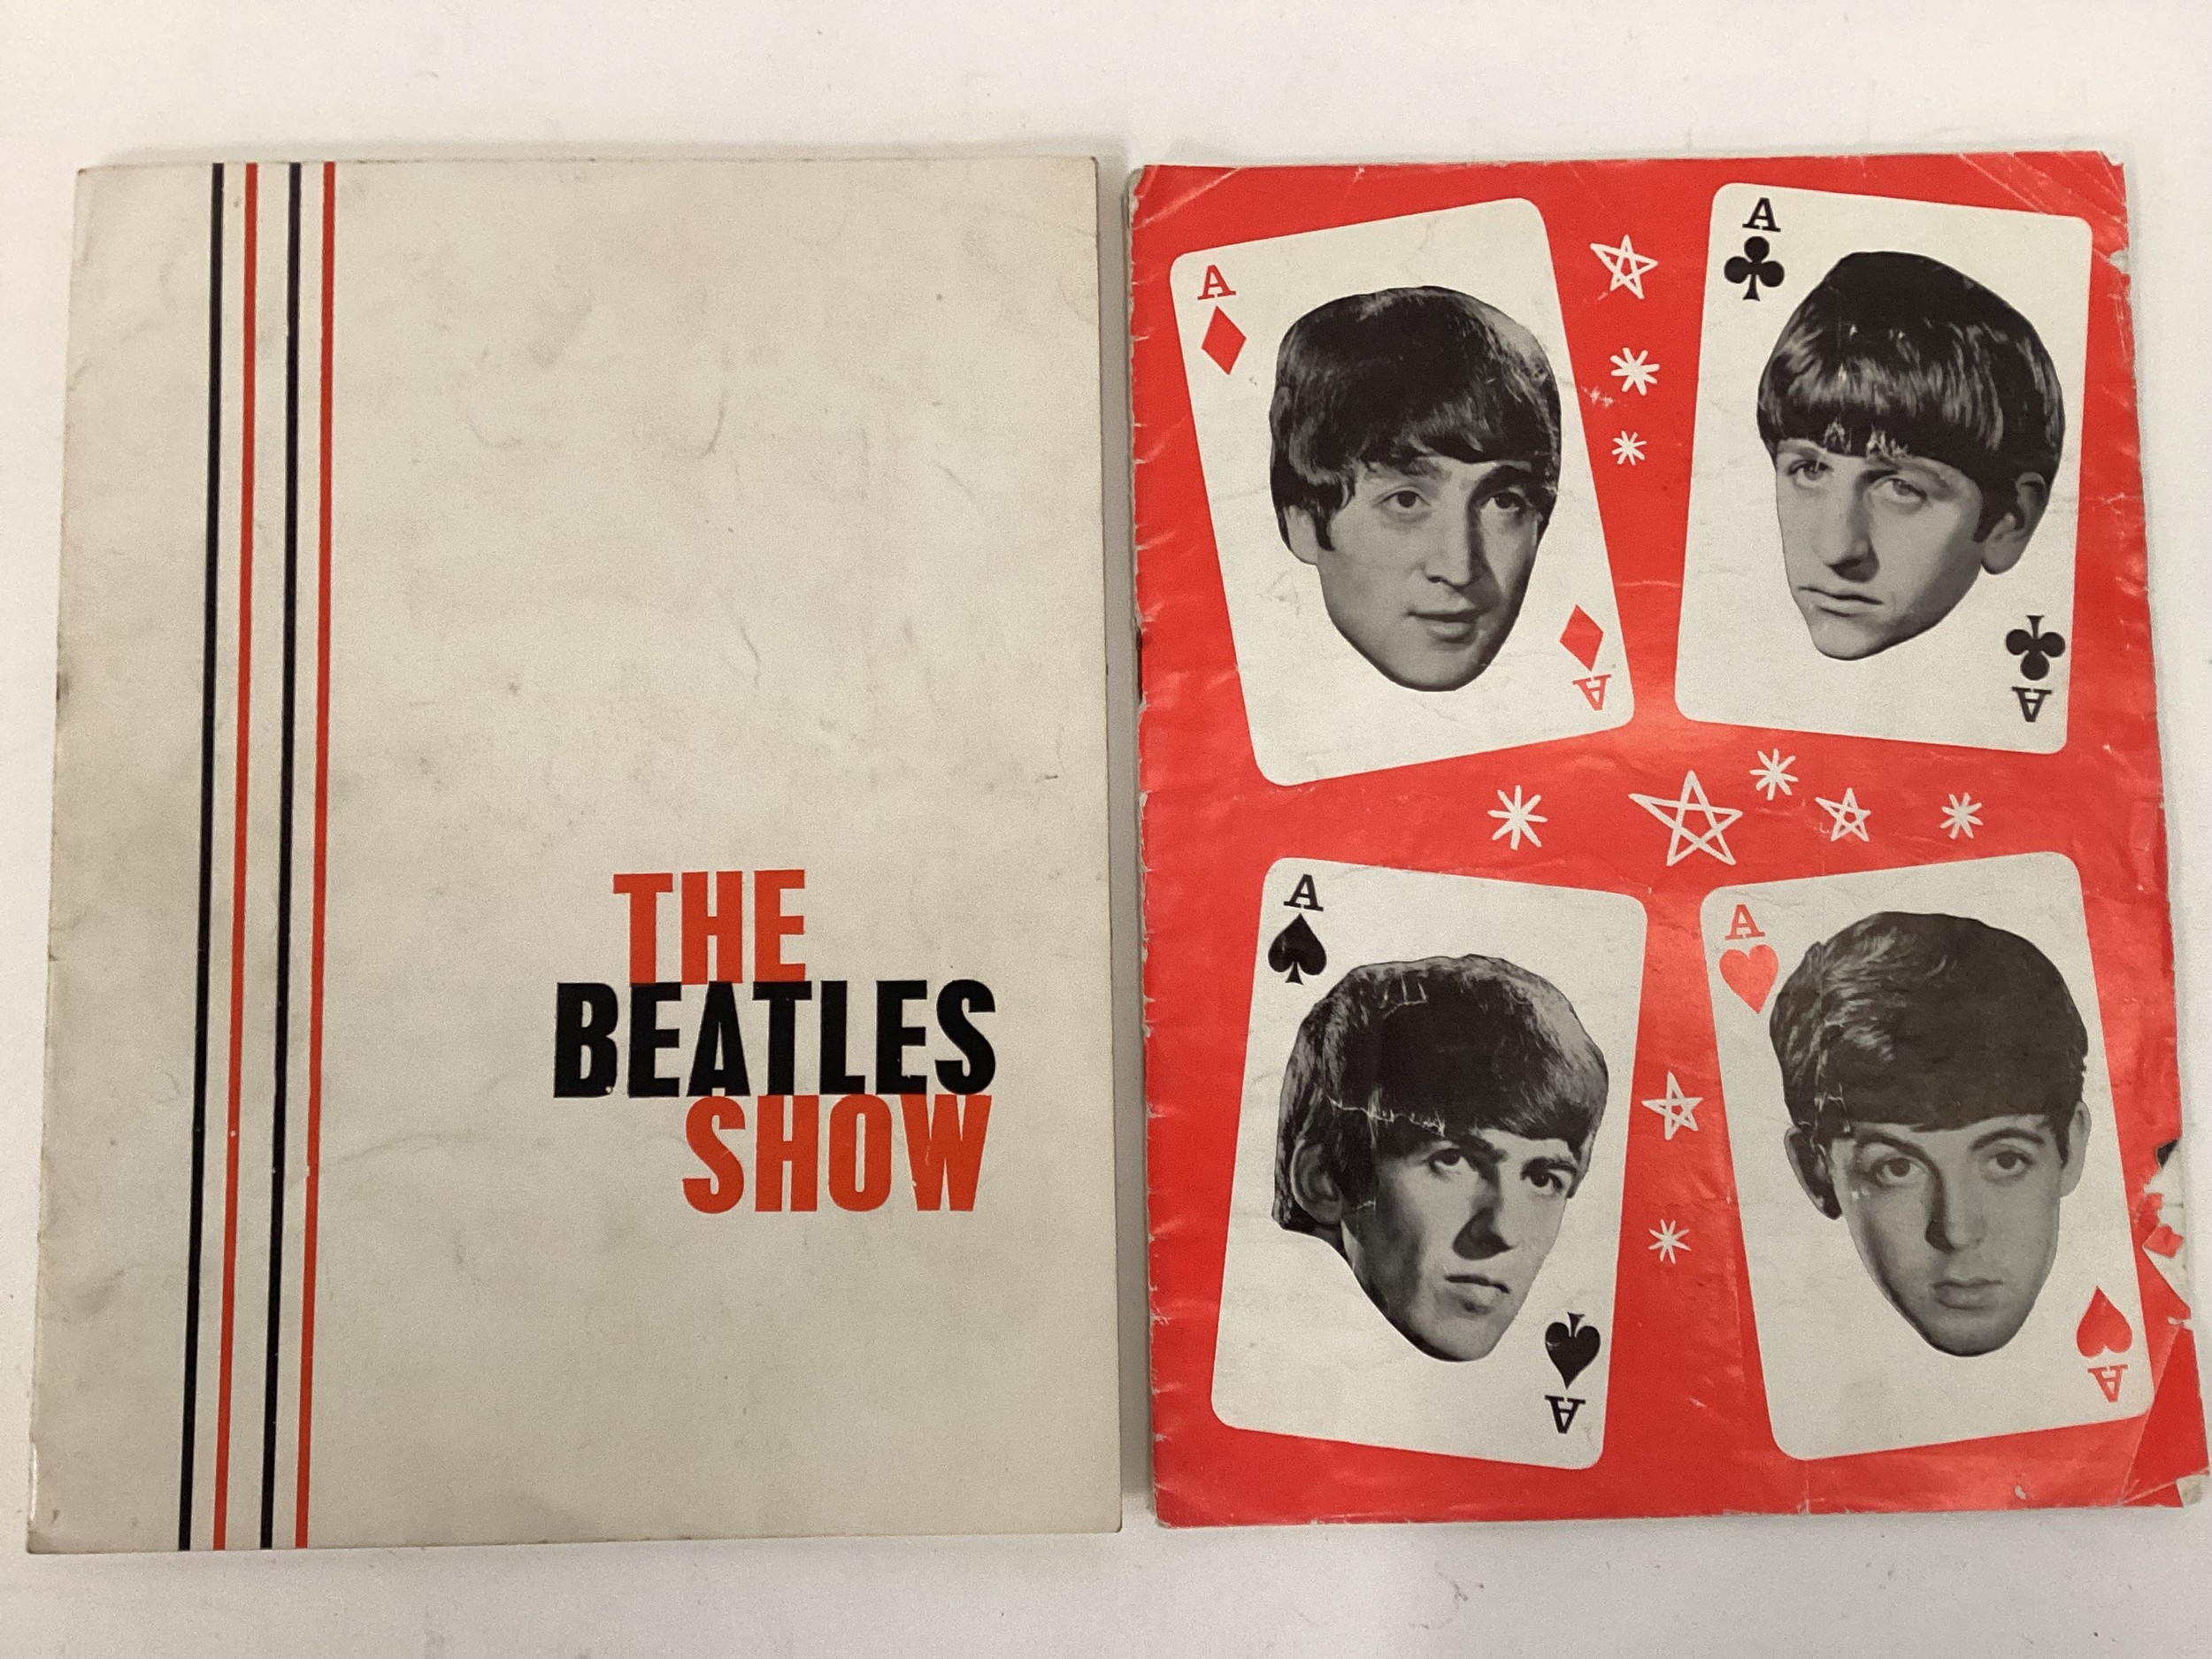 COLLECTION OF EPHEMERA FROM THE BEATLES. Nice collection of various items in print from The Beatles. - Image 3 of 9